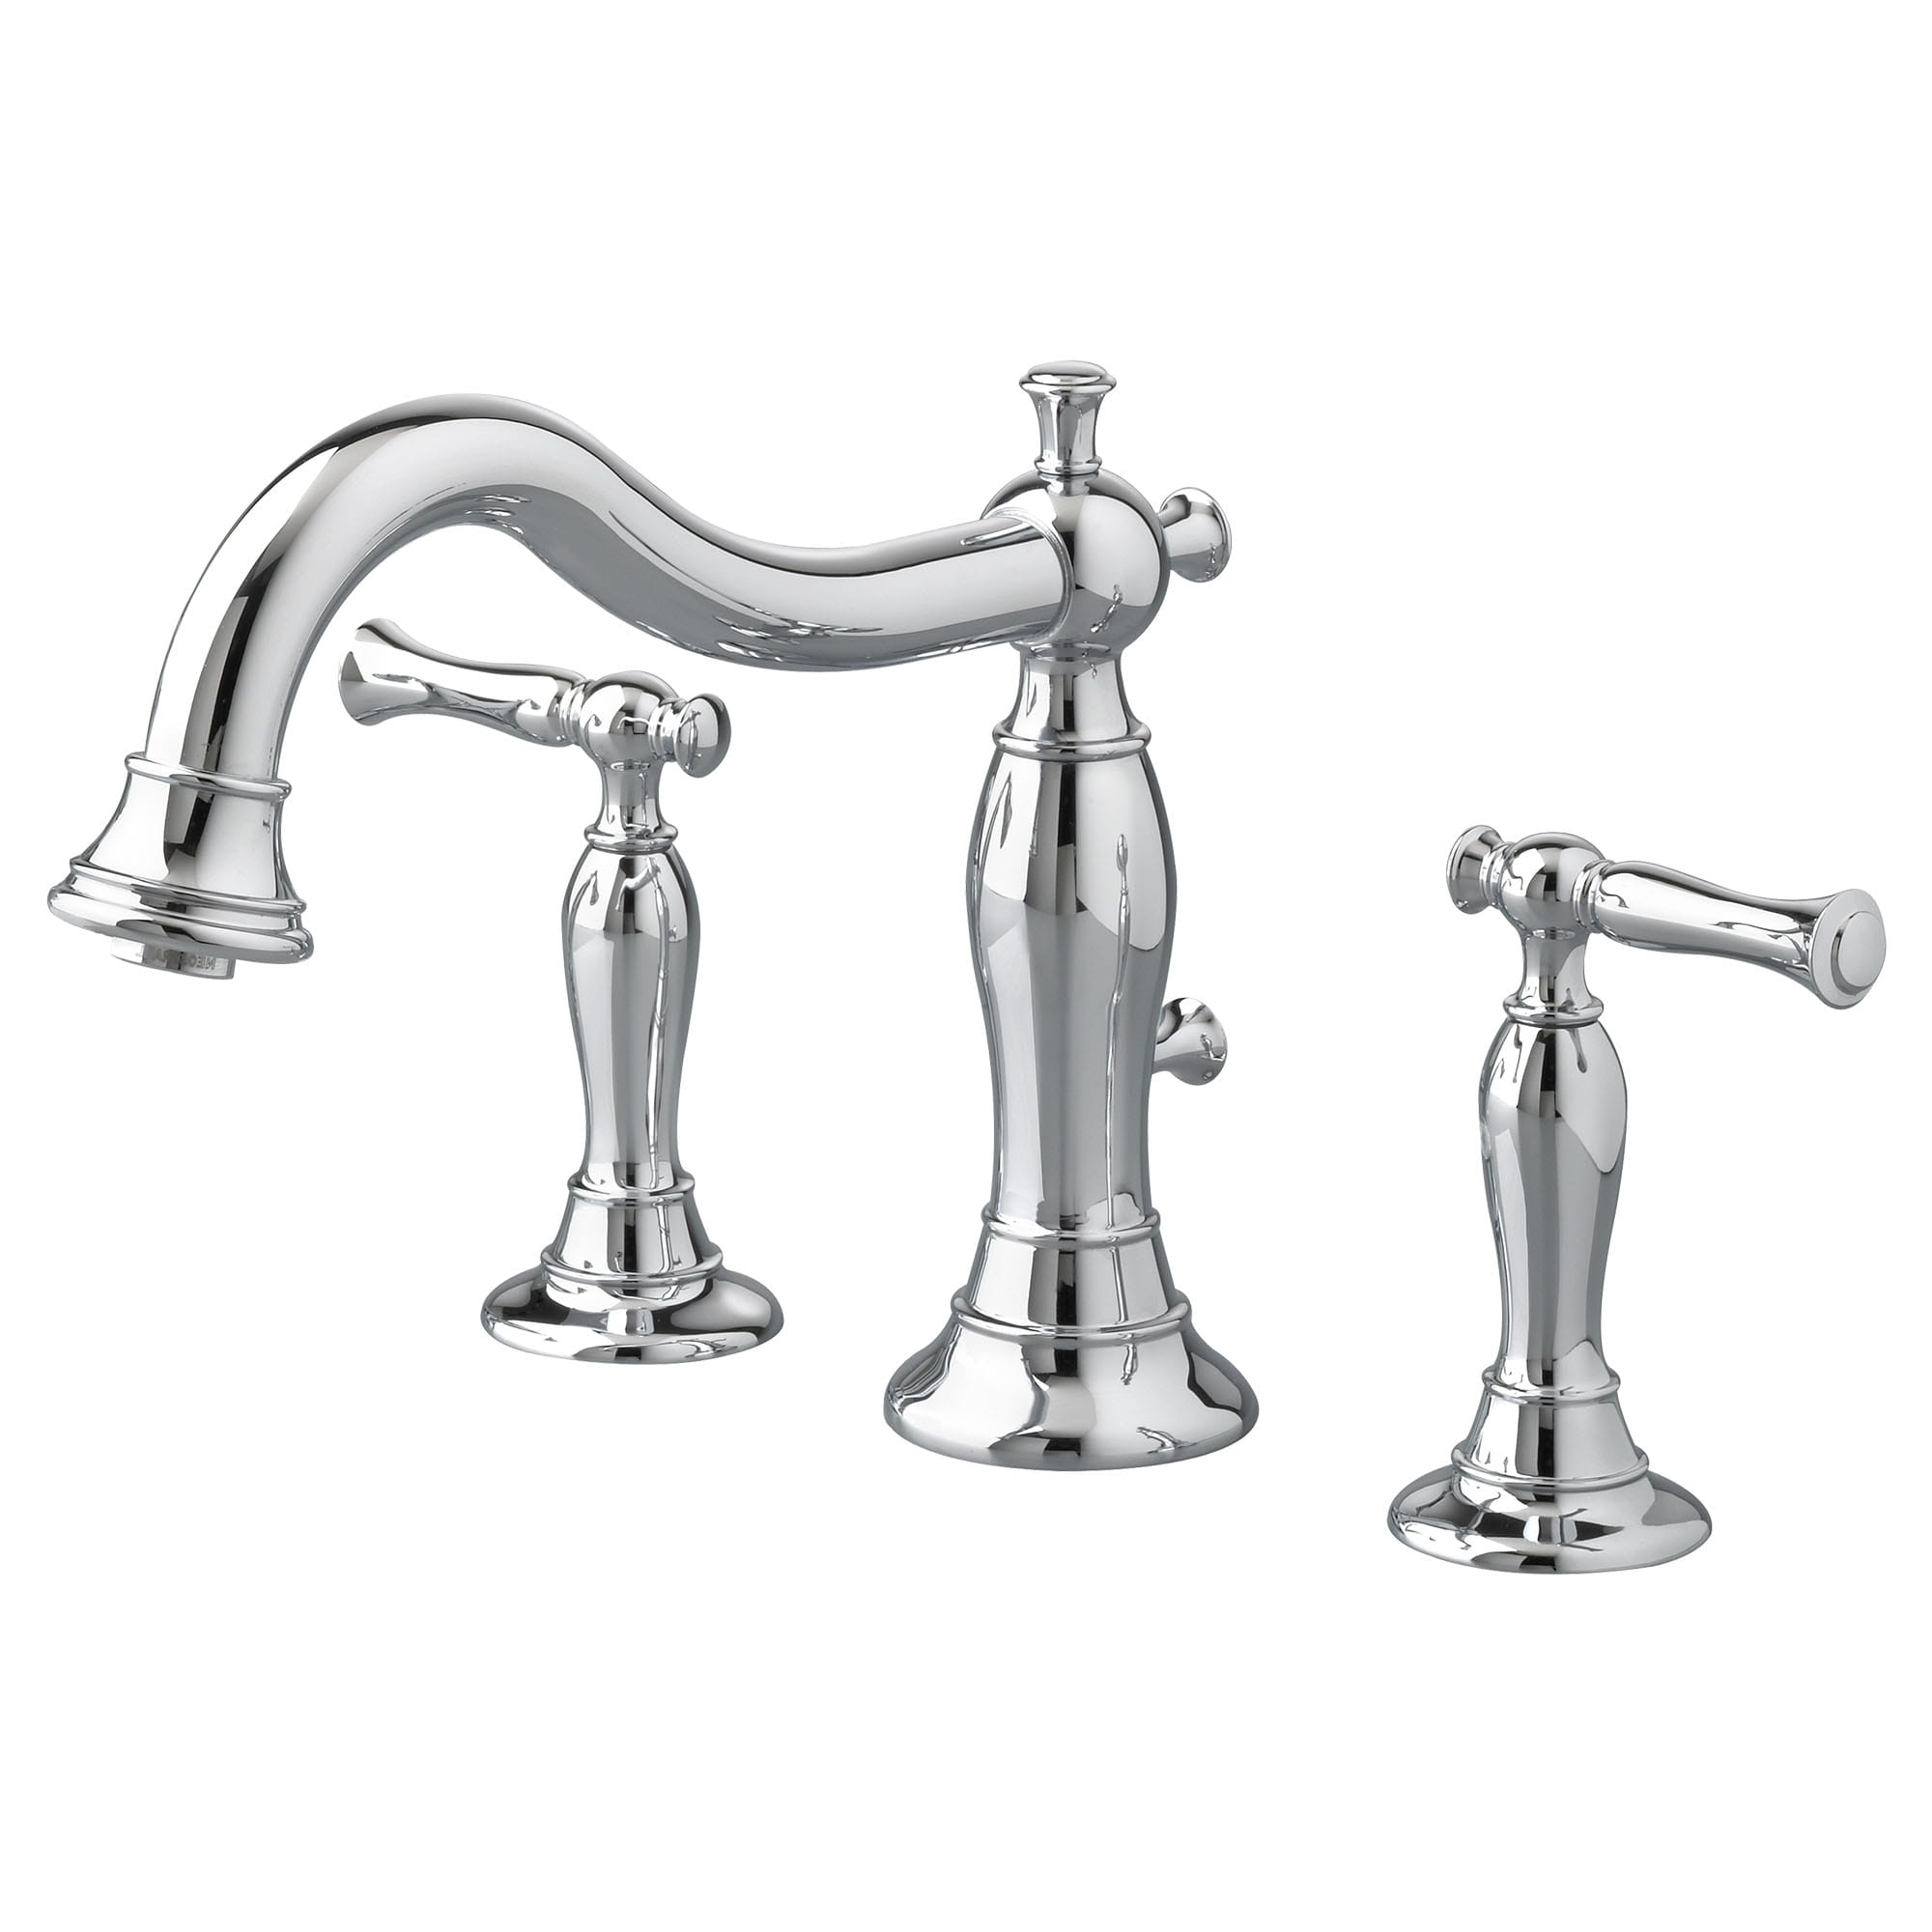 Quentin Bathtub Faucet With Lever Handles for Flash Rough In Valve CHROME